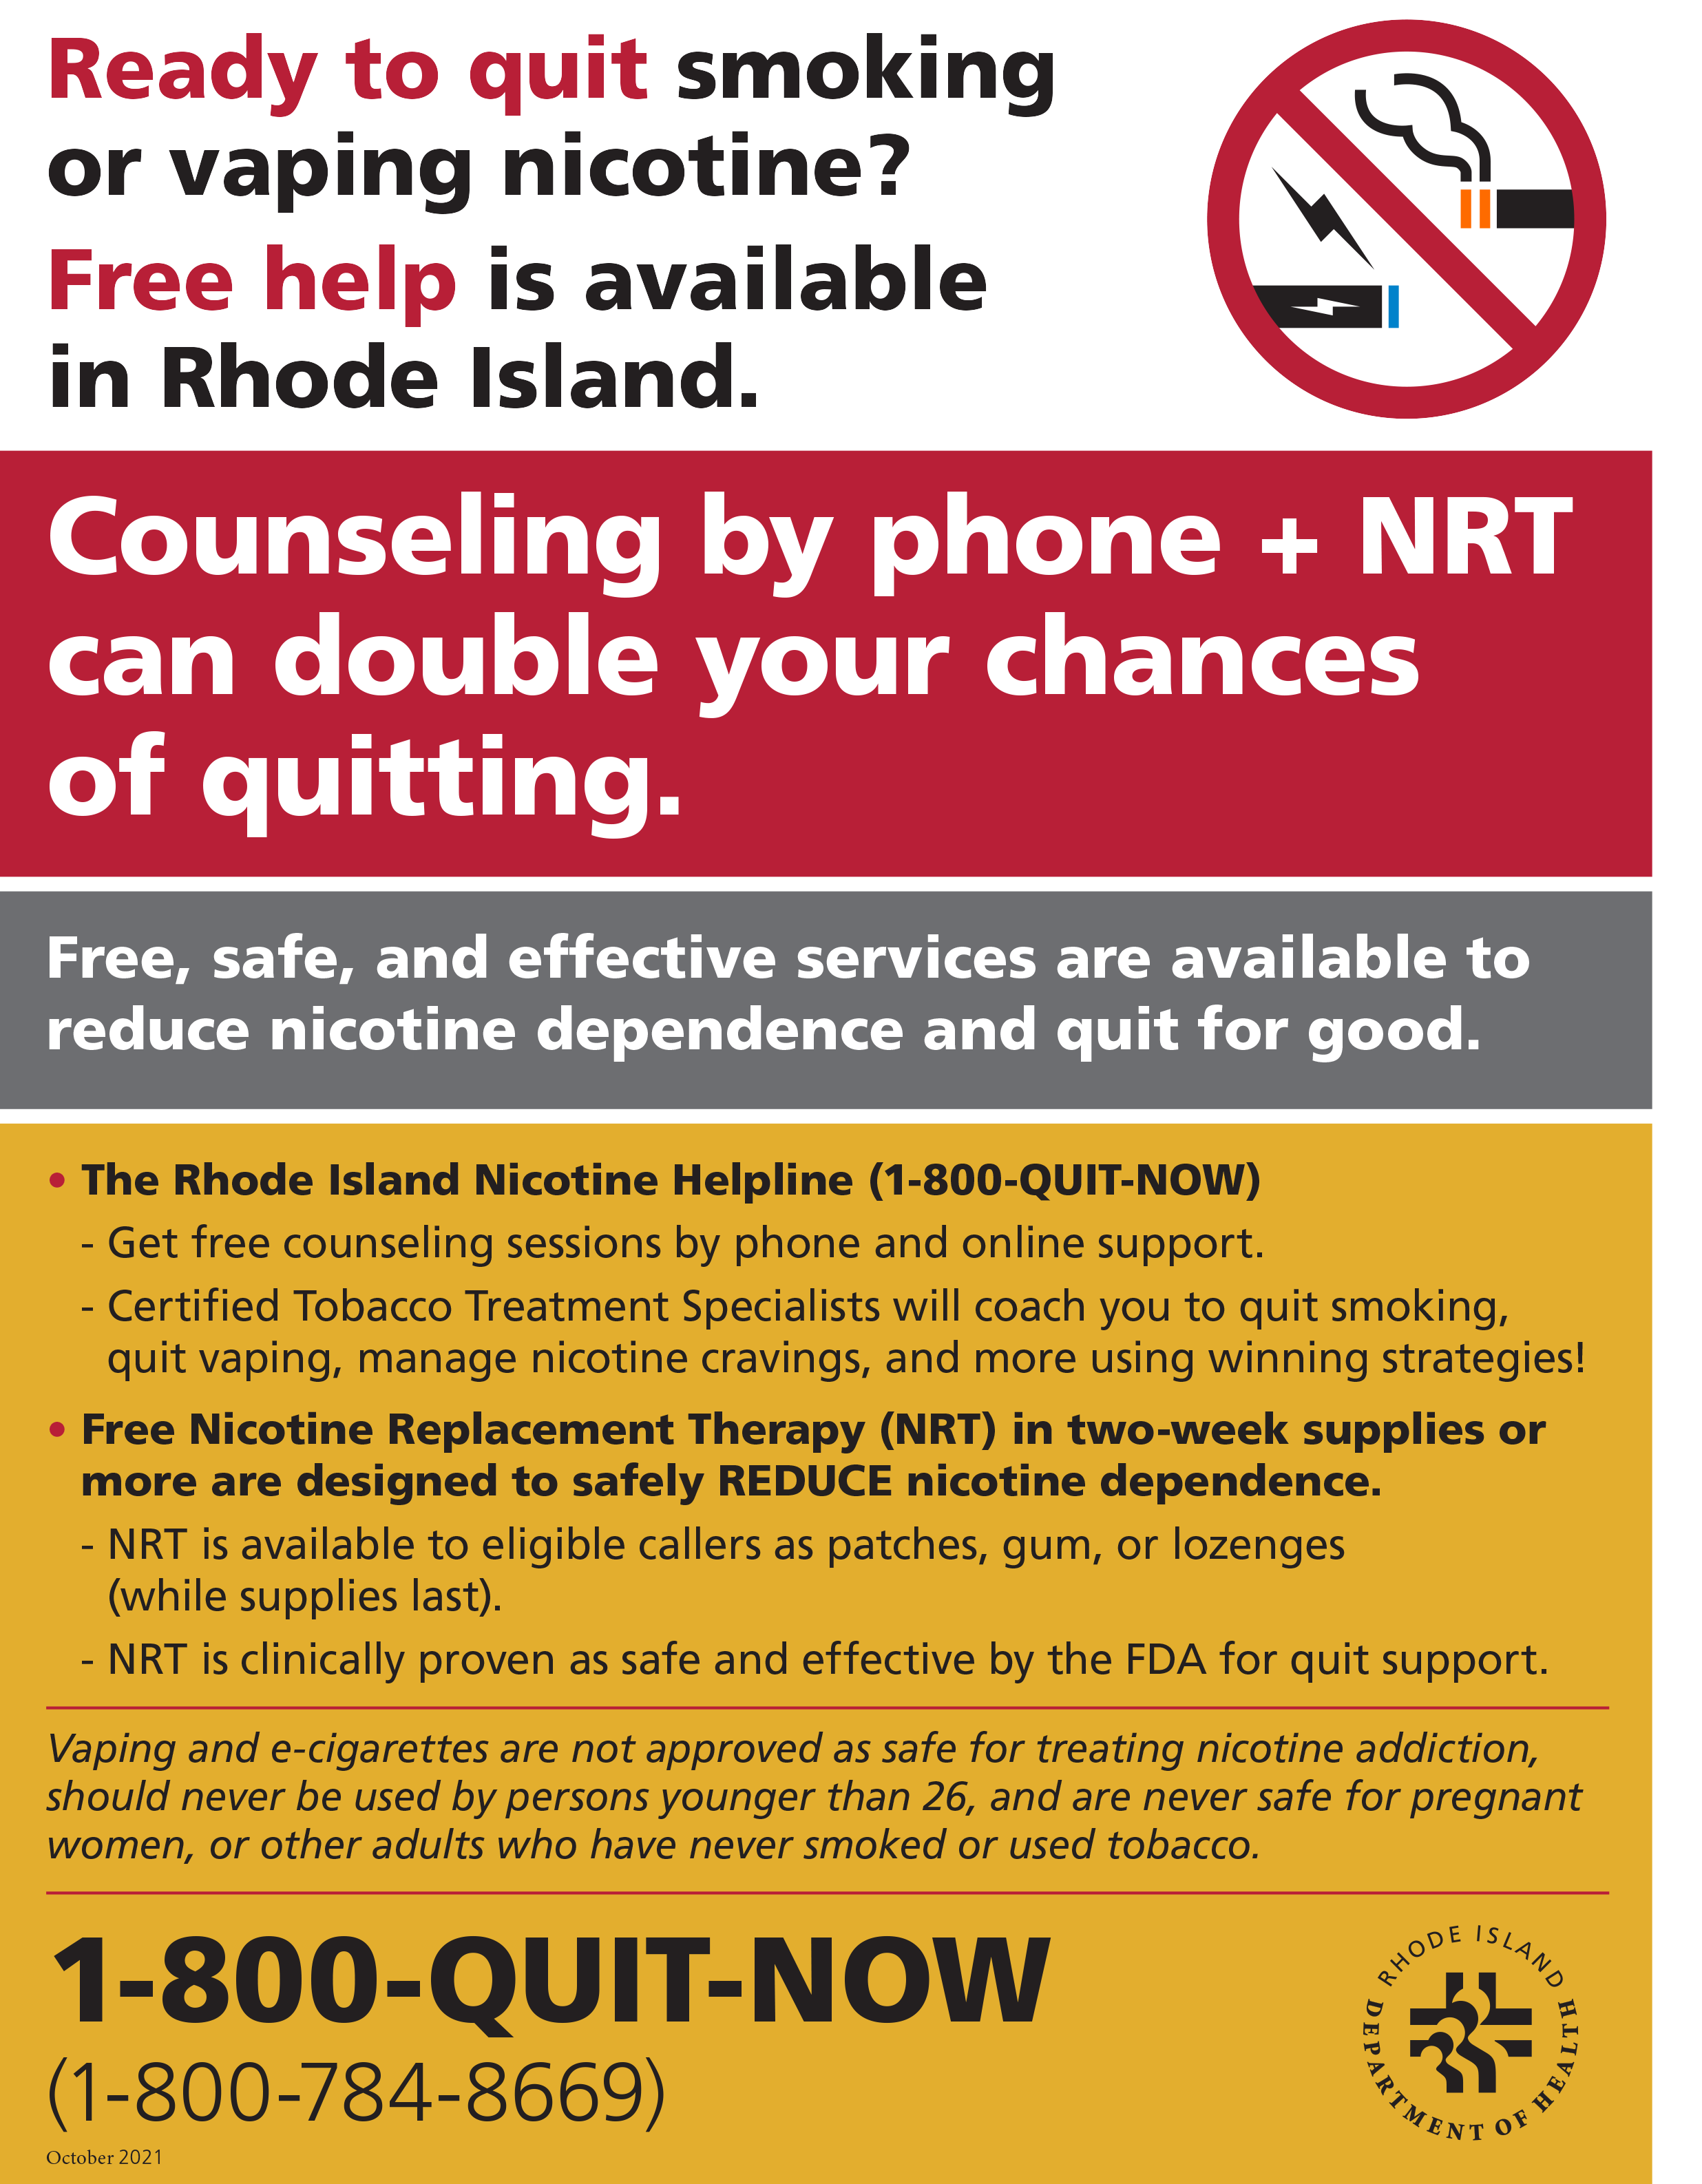 Rhode Island Nicotine Helpline Promotional Flyer (Available as online PDF only to download.)